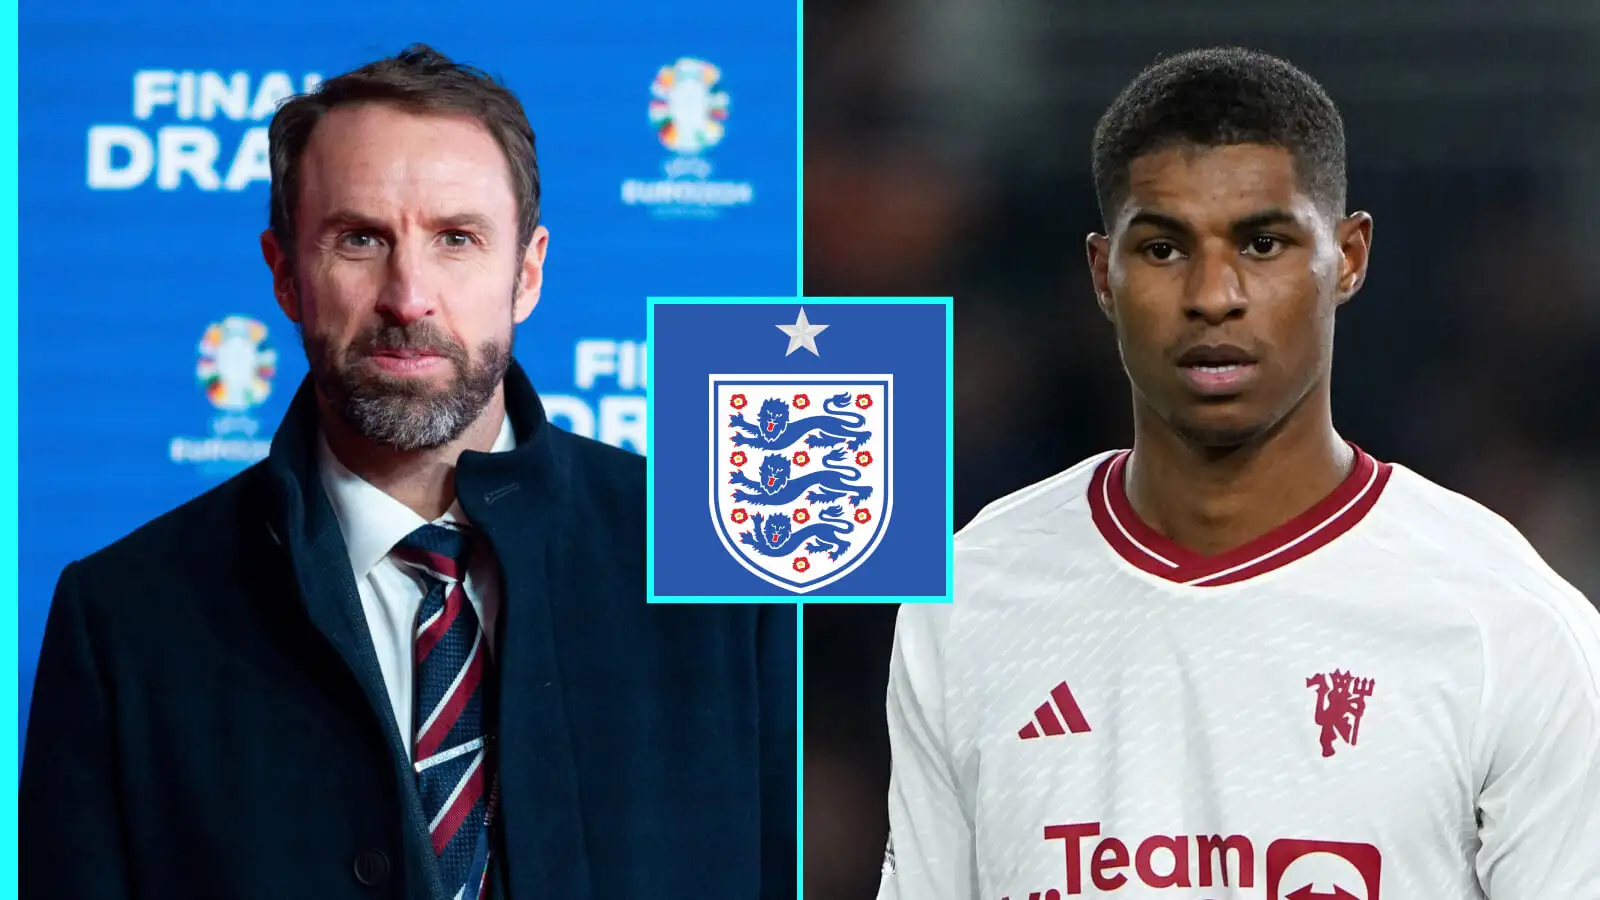 Marcus Rashford and Gareth Southgate by means of the England badge